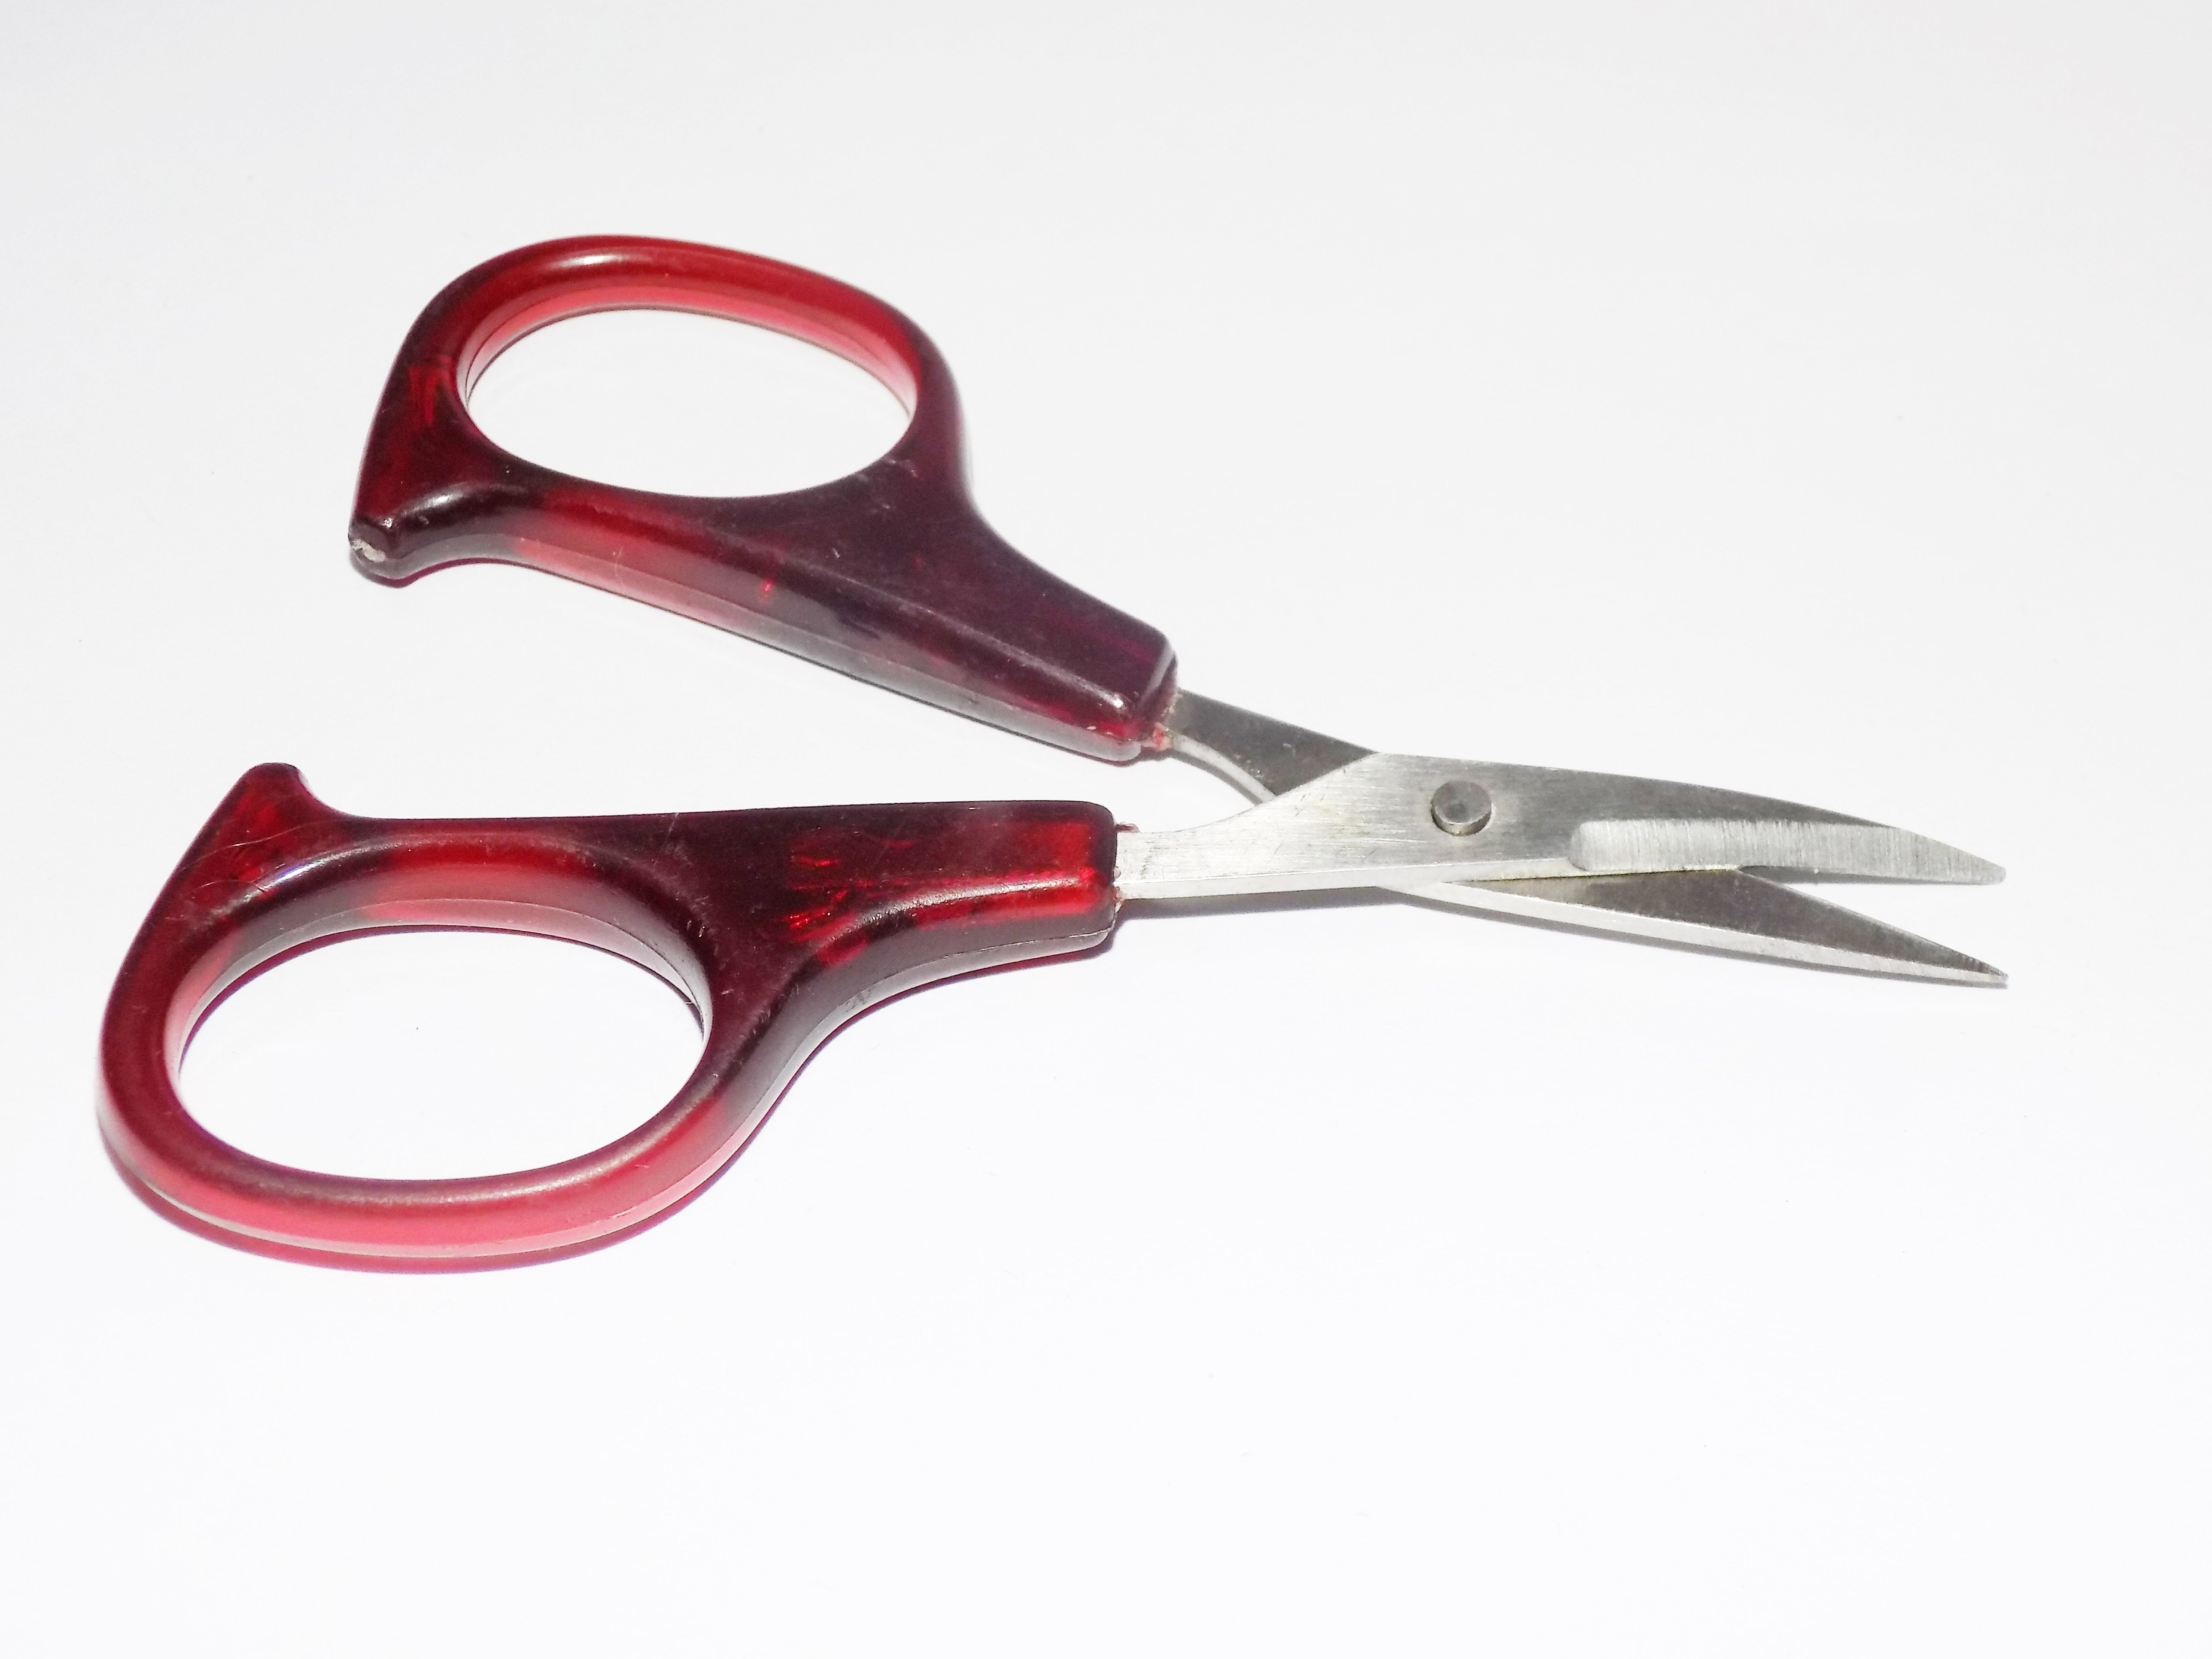 1572 multipurpose scissors for kitchen office and craft use